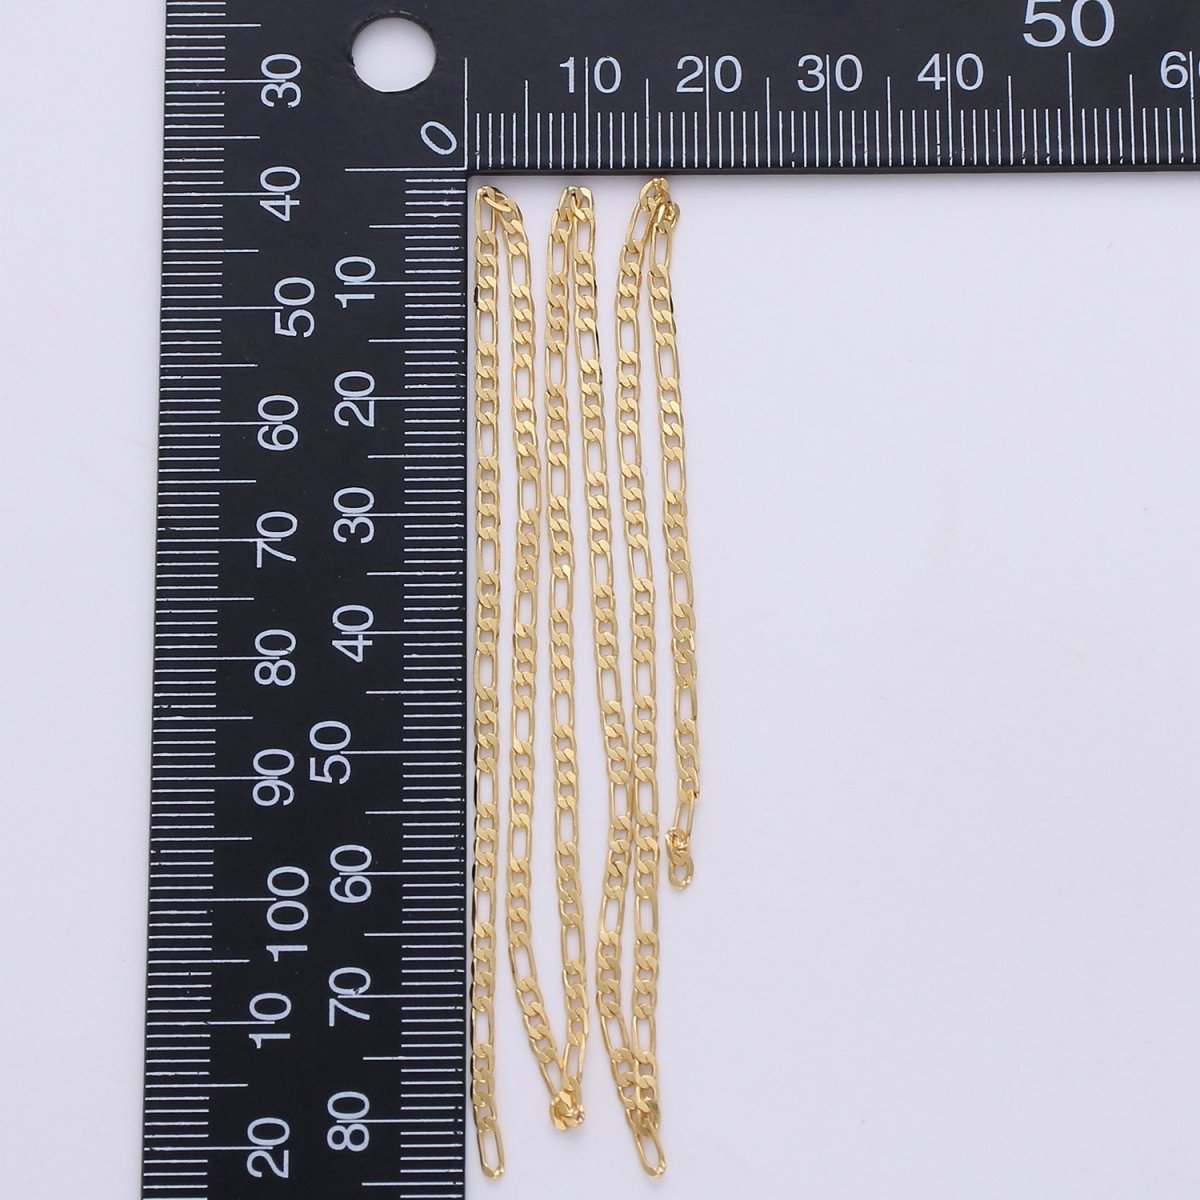 4mm Figaro Chain, 24K Gold Filled Figaro Chain, Flat Figaro Chain Jewelry Chain Sold by the Yard For Necklace Bracelet Anklet Supply Component | ROLL-226 Clearance Pricing - DLUXCA